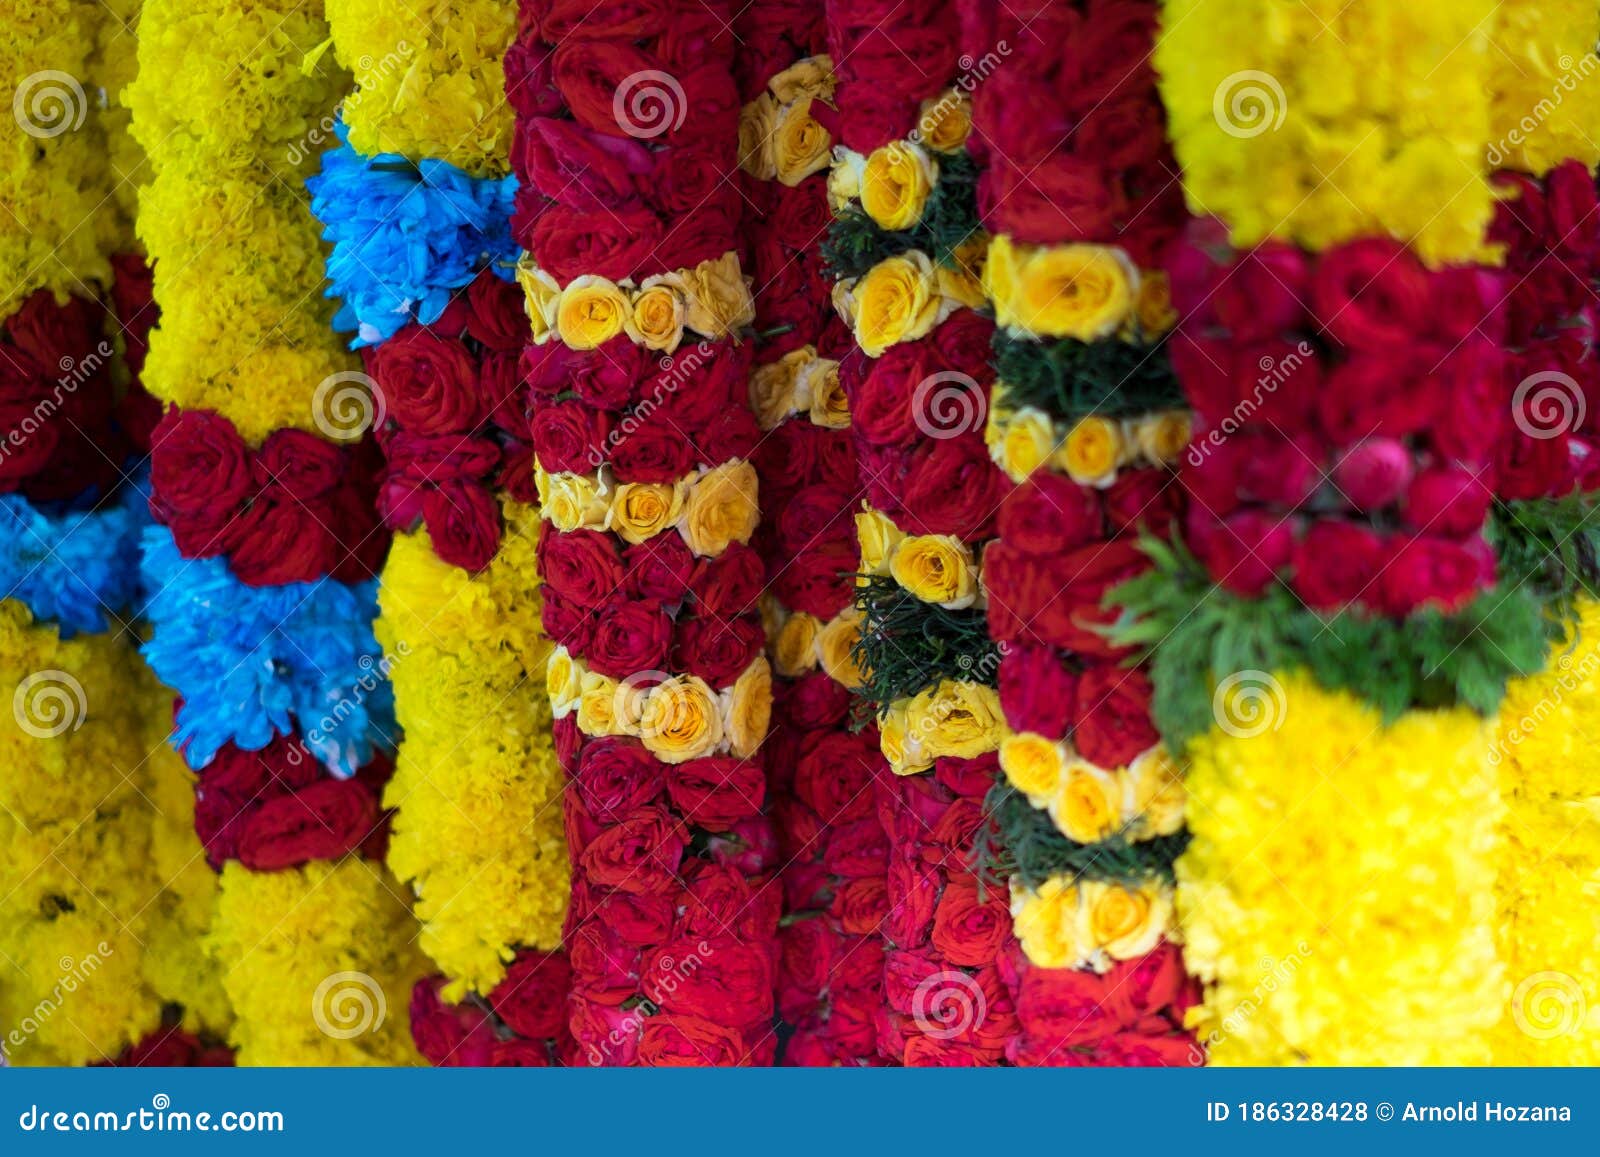 Flower Garlands Little India Singapore Photos Free Royalty Free Stock Photos From Dreamstime